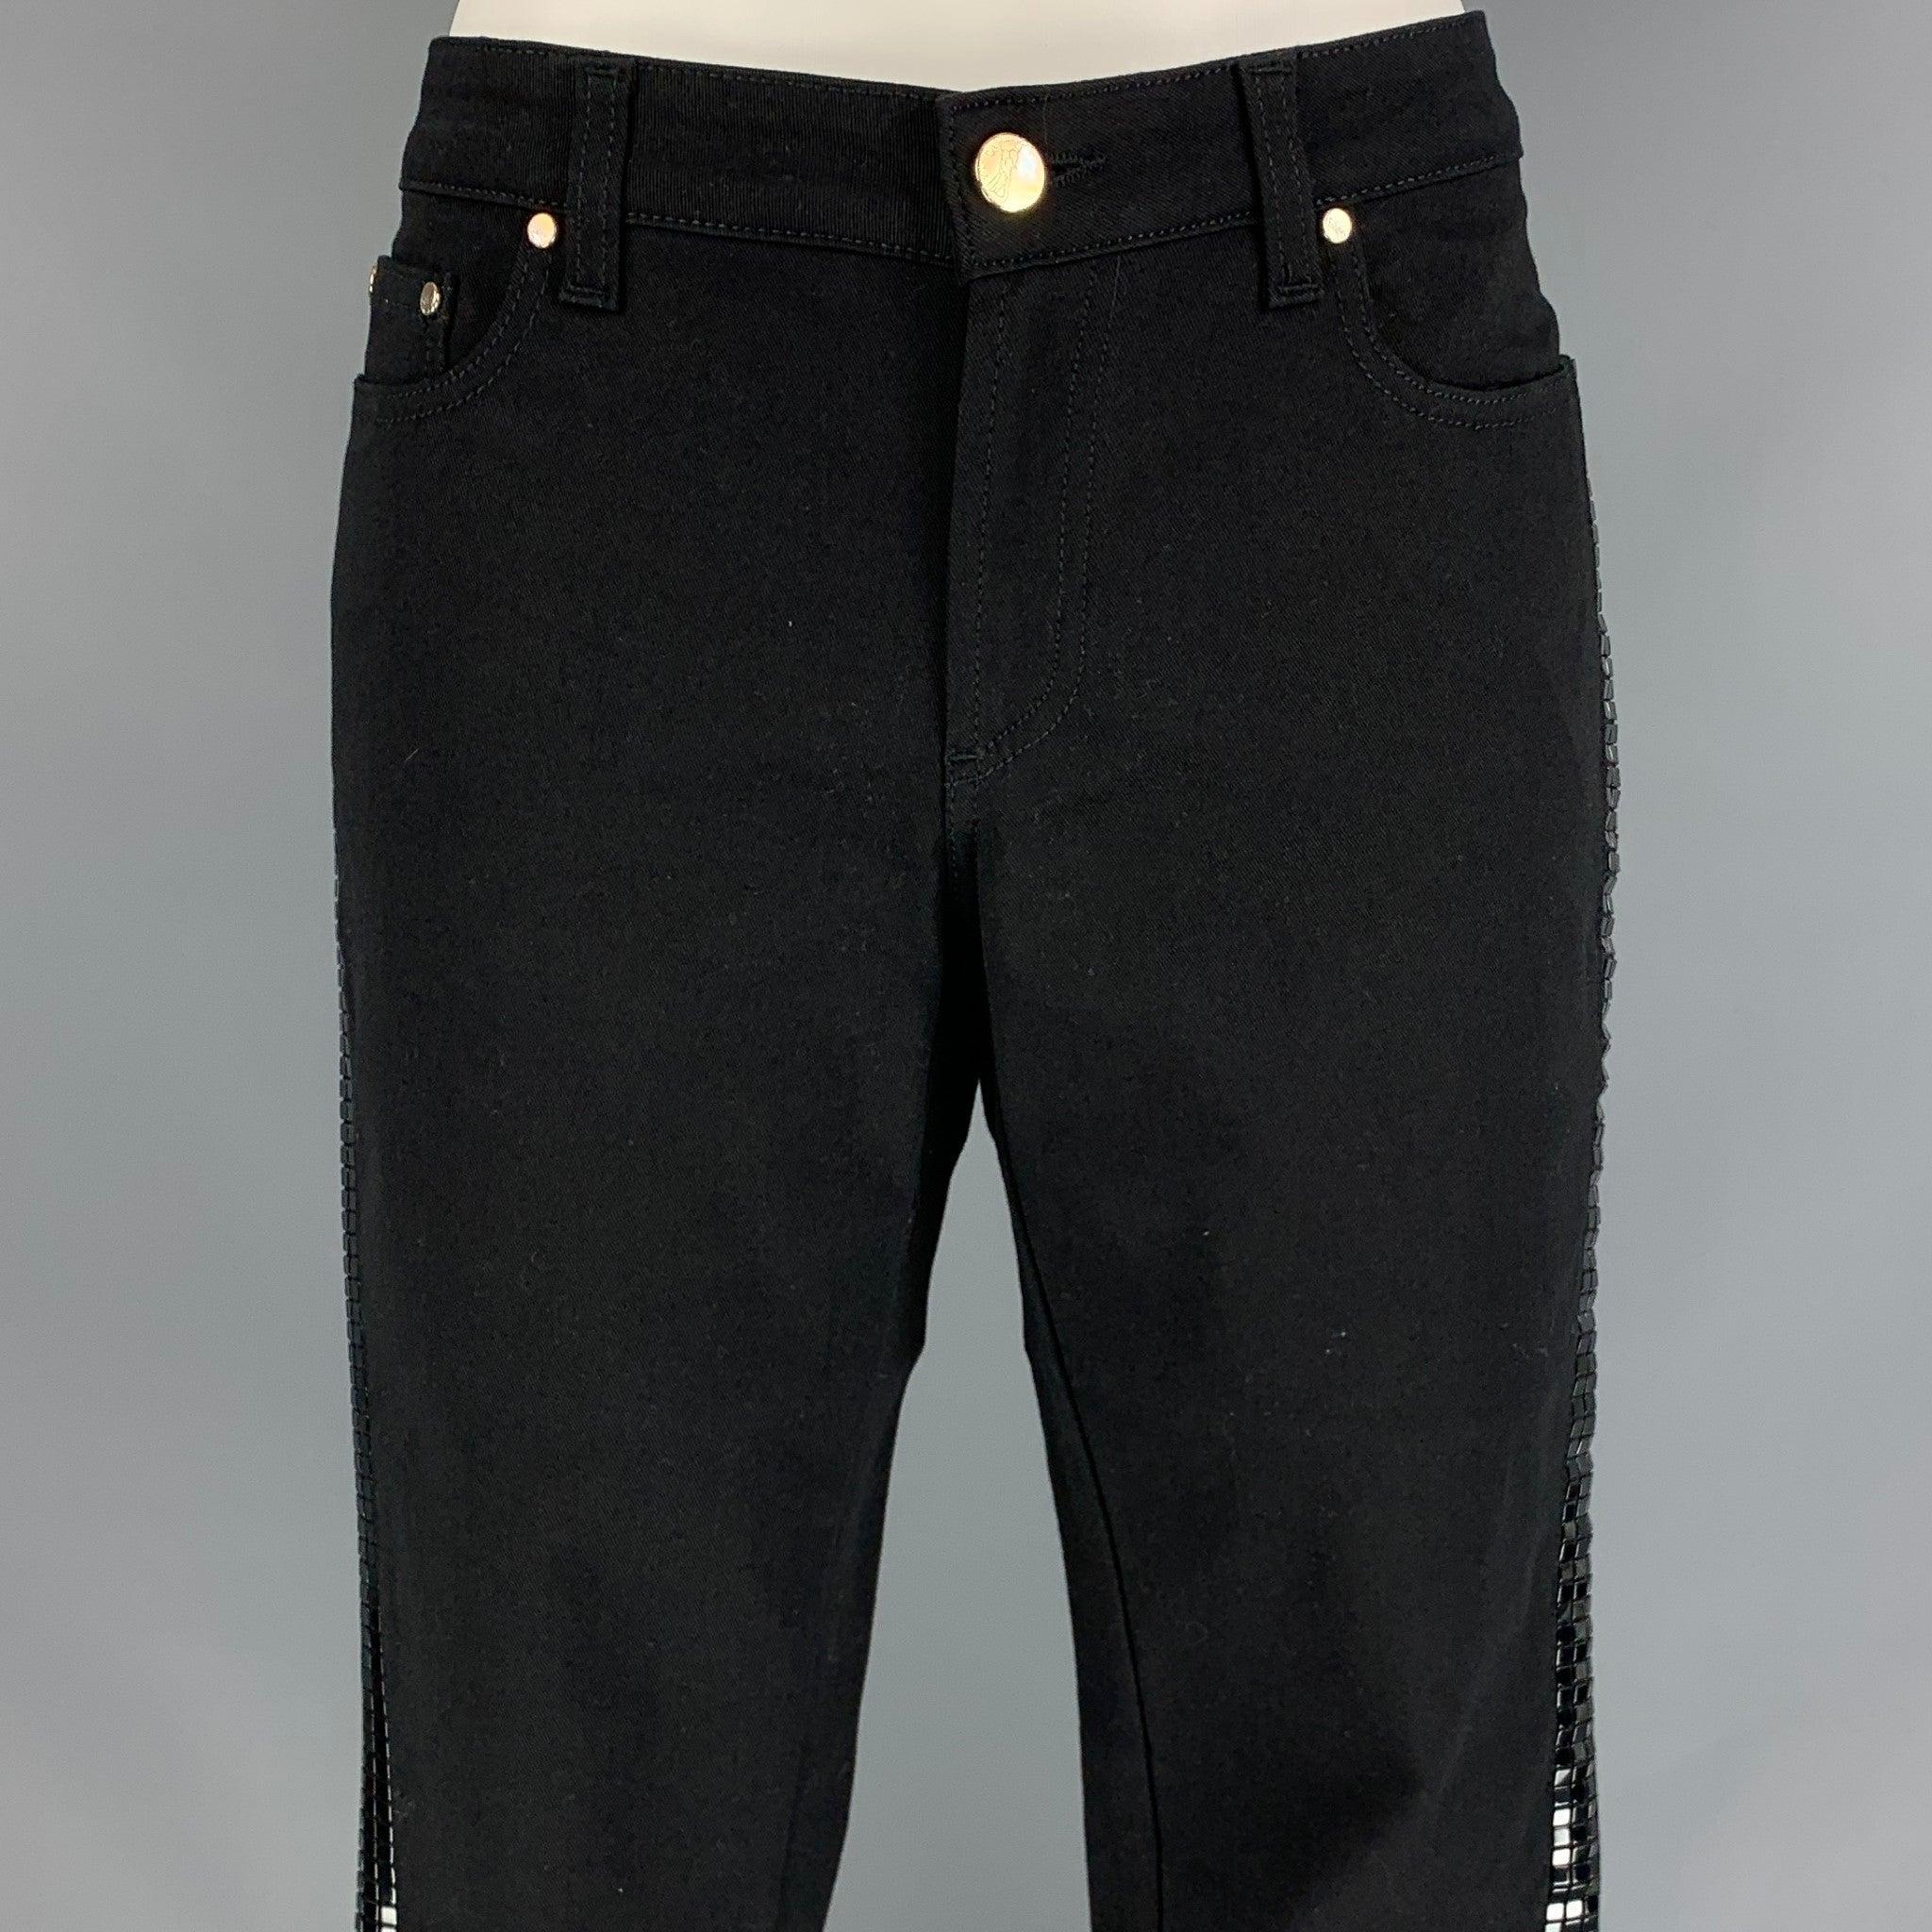 VERSACE COLLECTION casual pants comes in a black cotton blend featuring a skinny fit, side studded design, silver tone hardware, and a zip fly closure. Made in Romania. New With Tags.  

Marked:  30 

Measurements: 
  Waist: 32 inches  Rise: 8